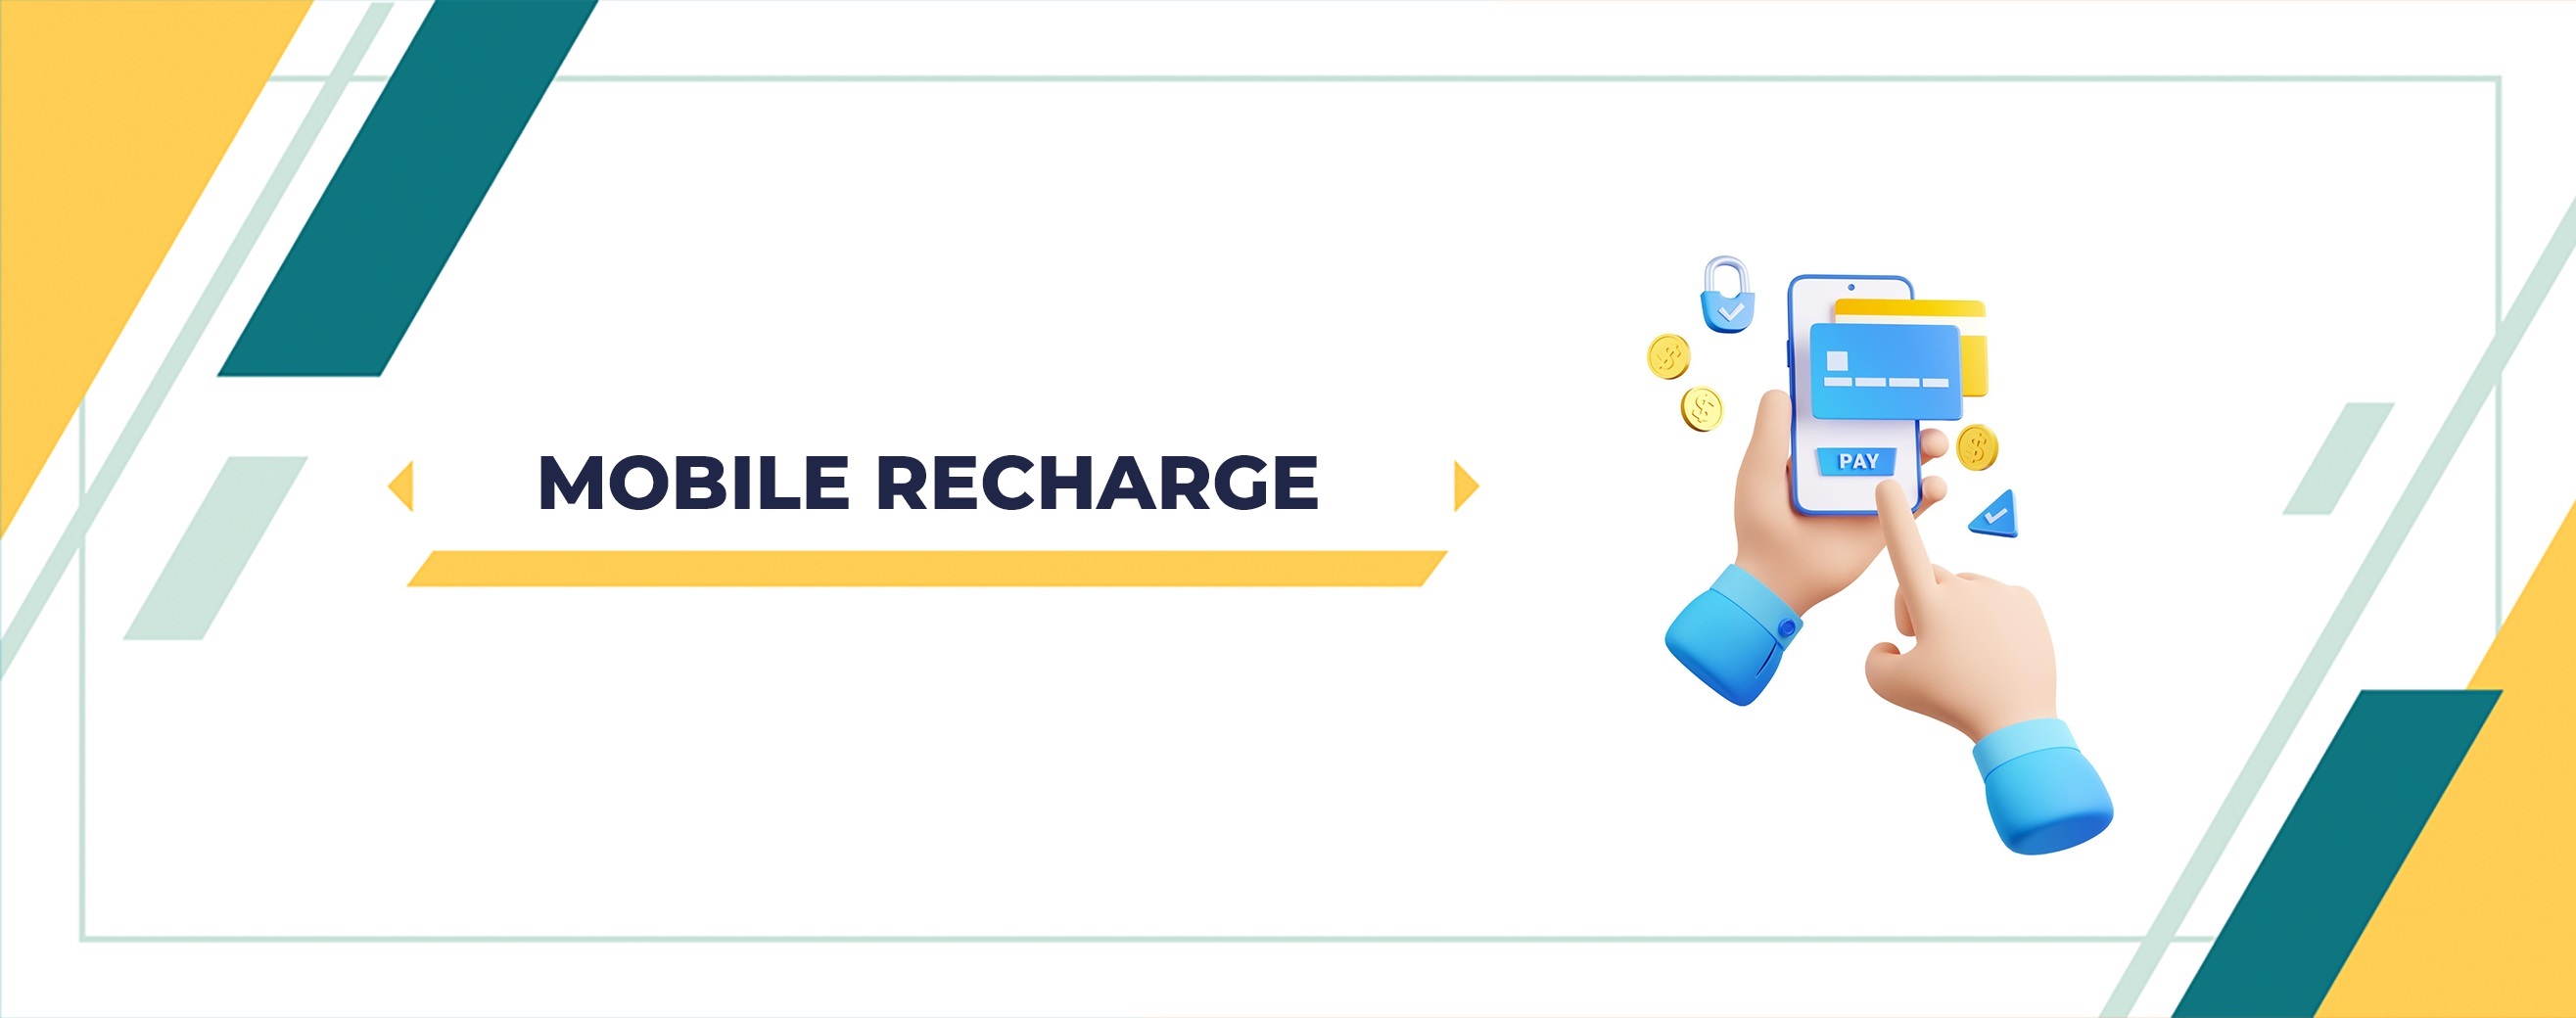 RECHARGE 2 ALL